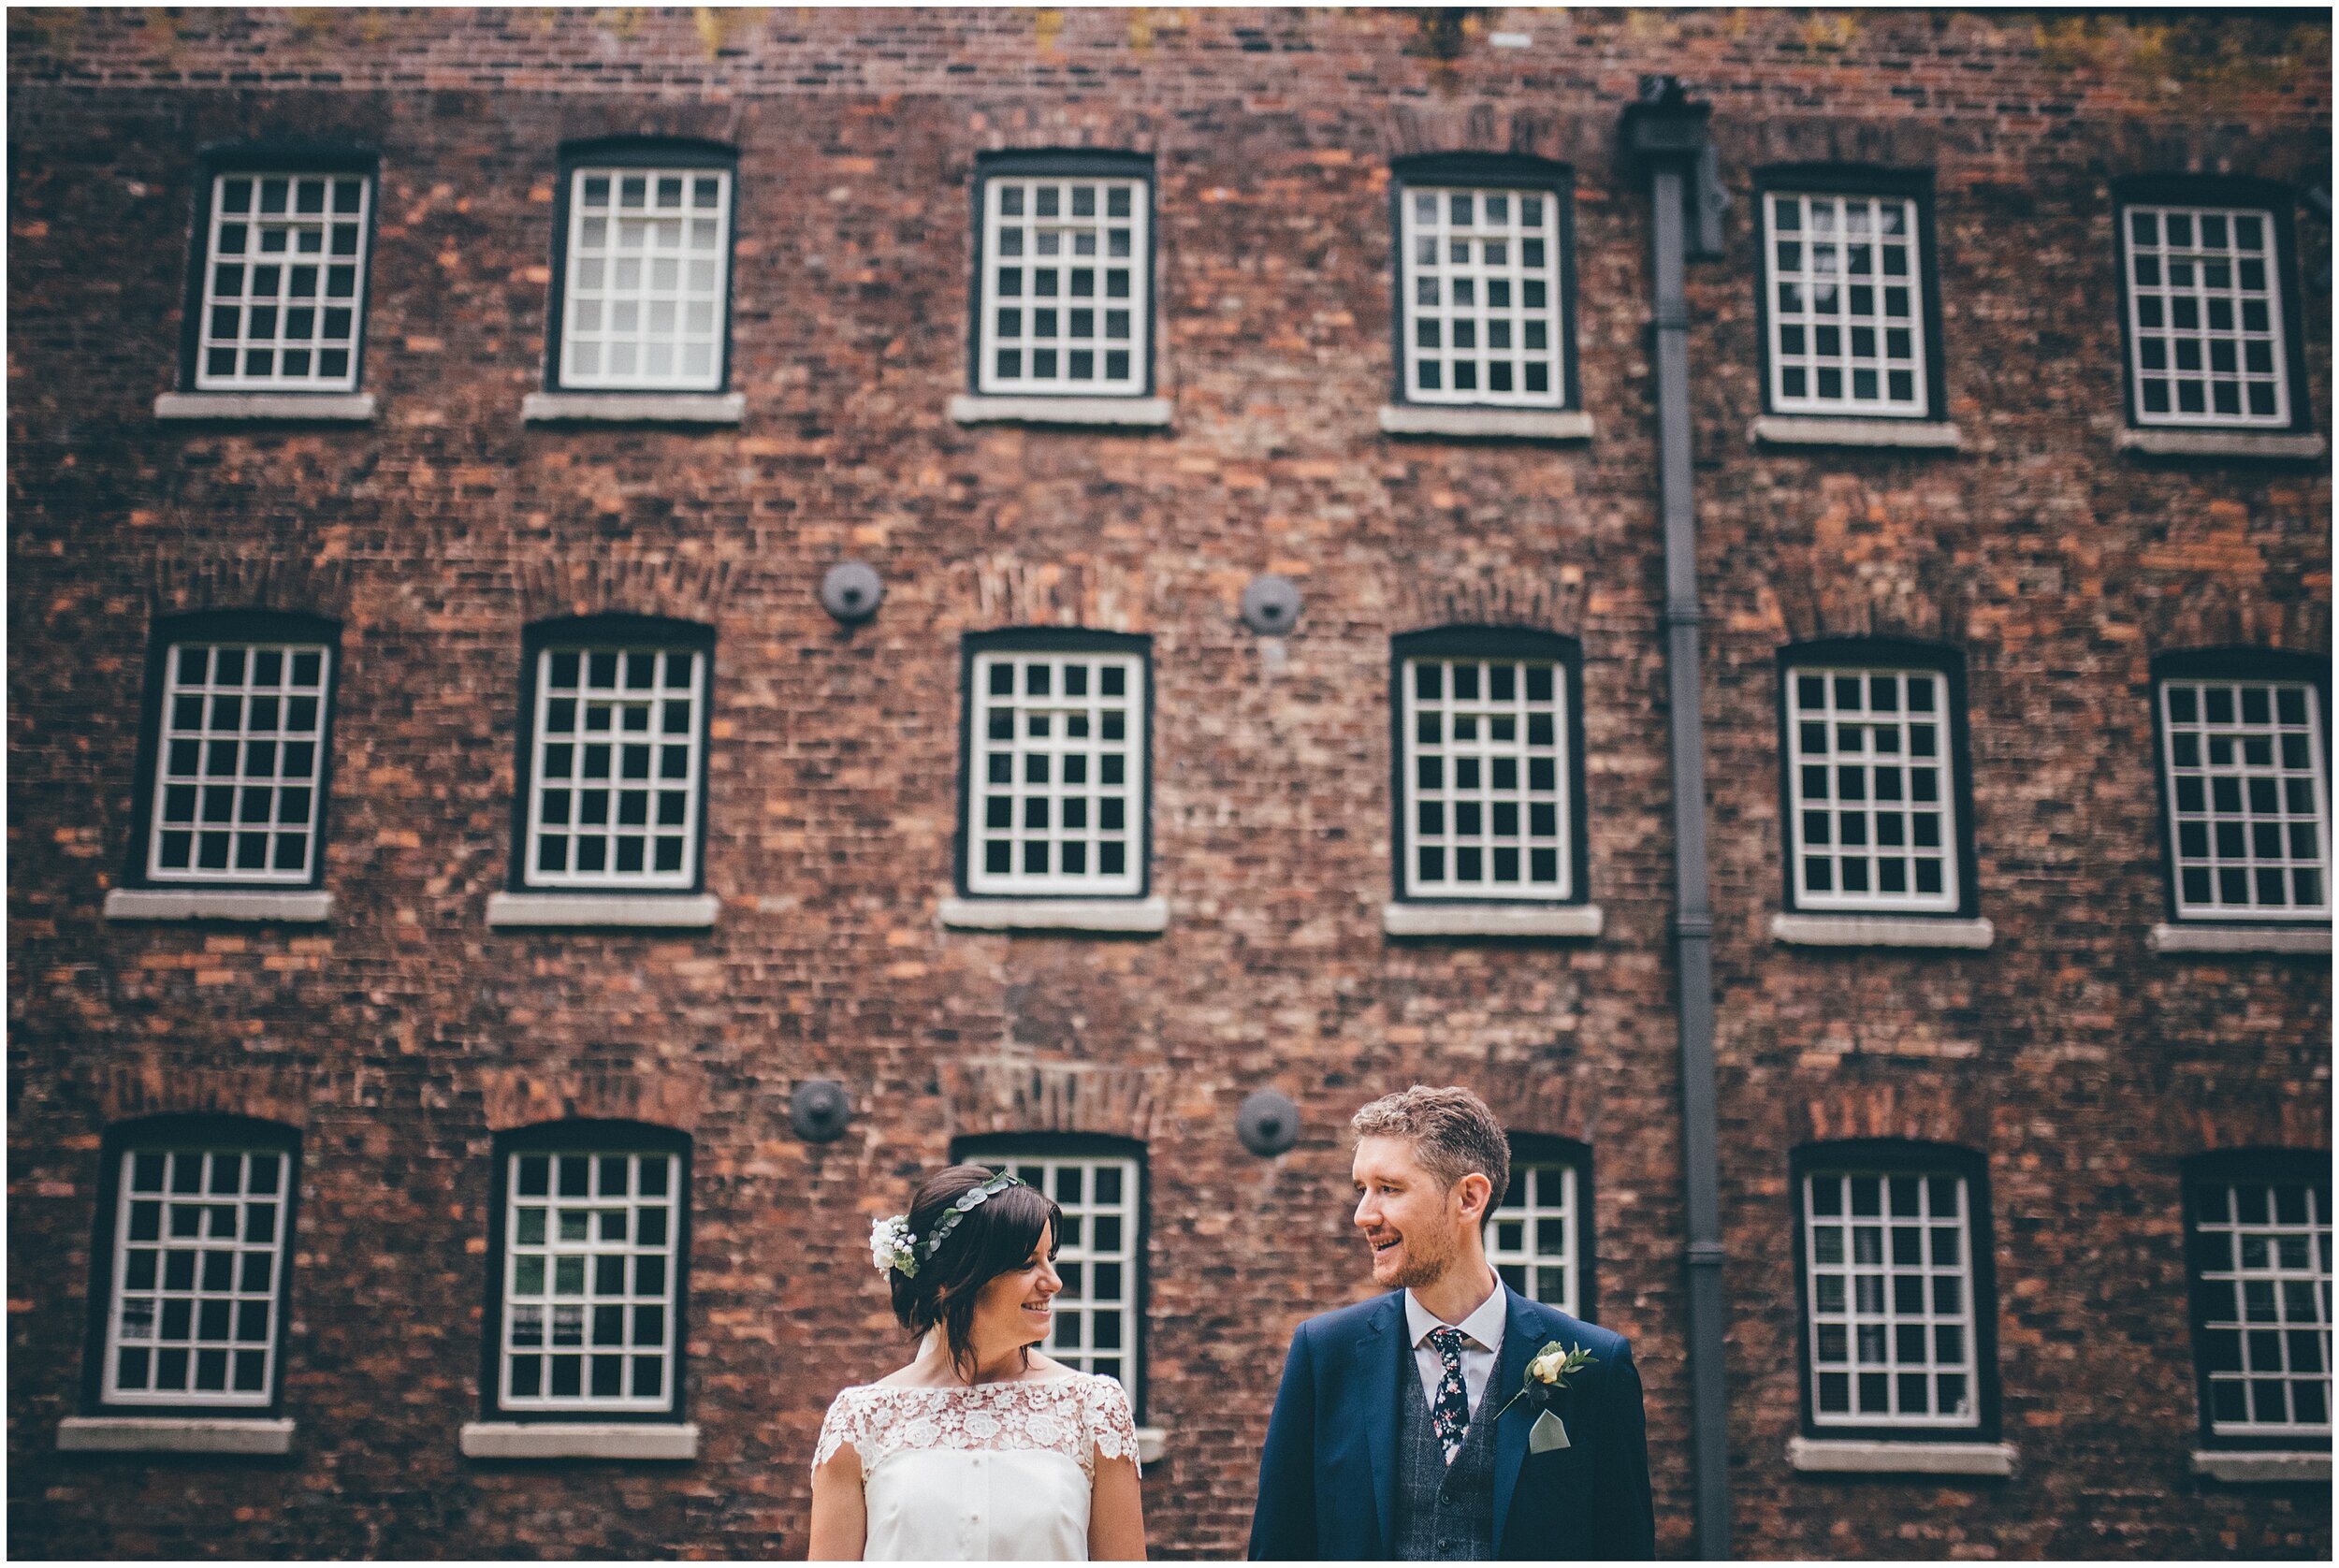 Bride and groom at Quarry Bank Mill wedding in Cheshire near to Manchester.